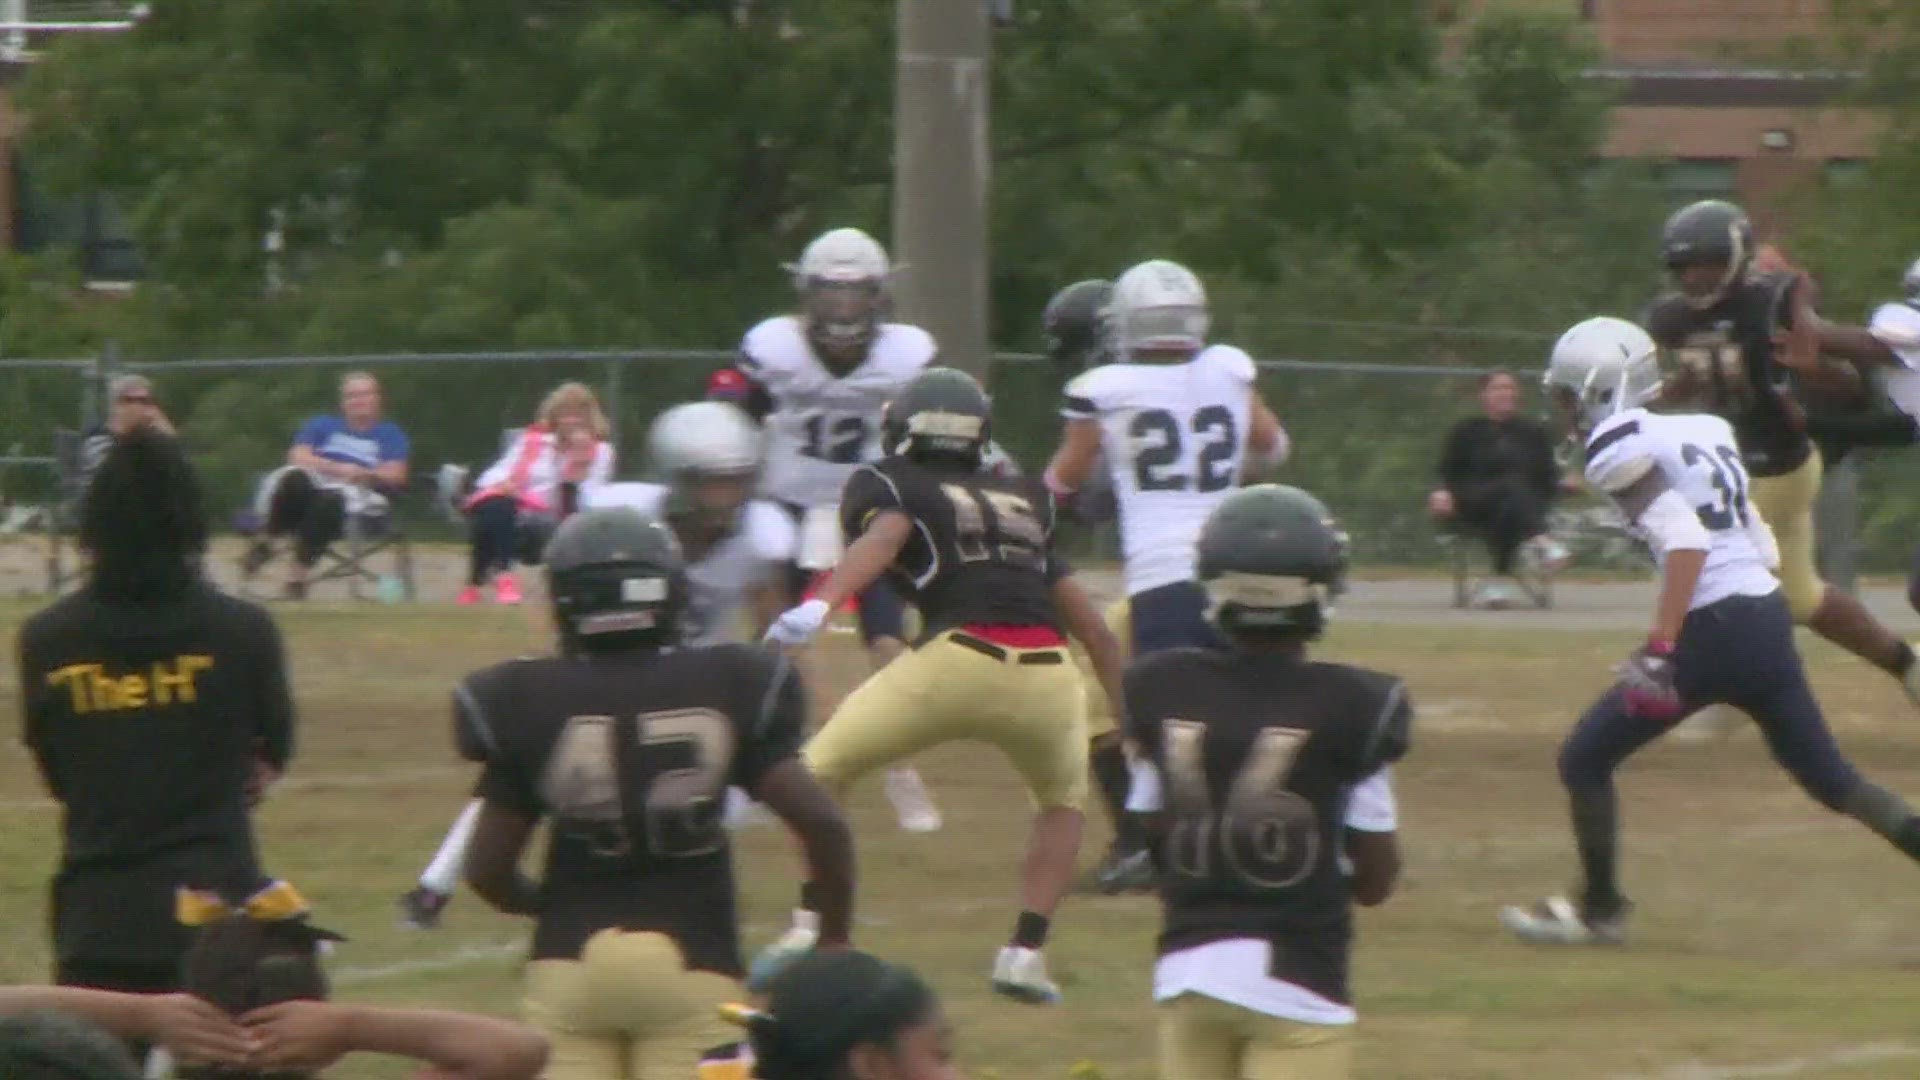 For the first time, Hairston Middle will hold a football game on campus.